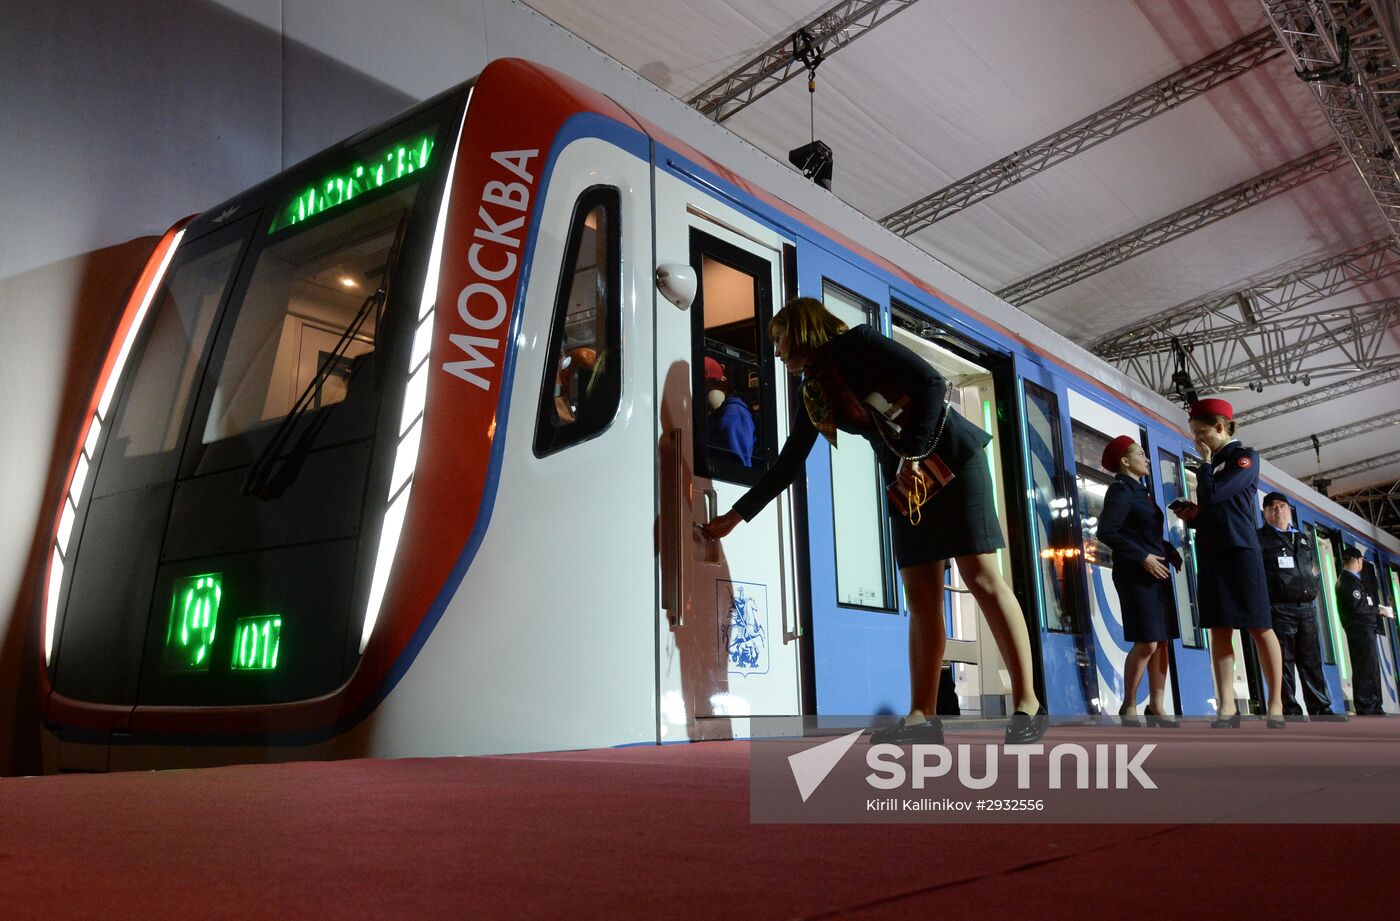 New Moscow metro train Moskva presented